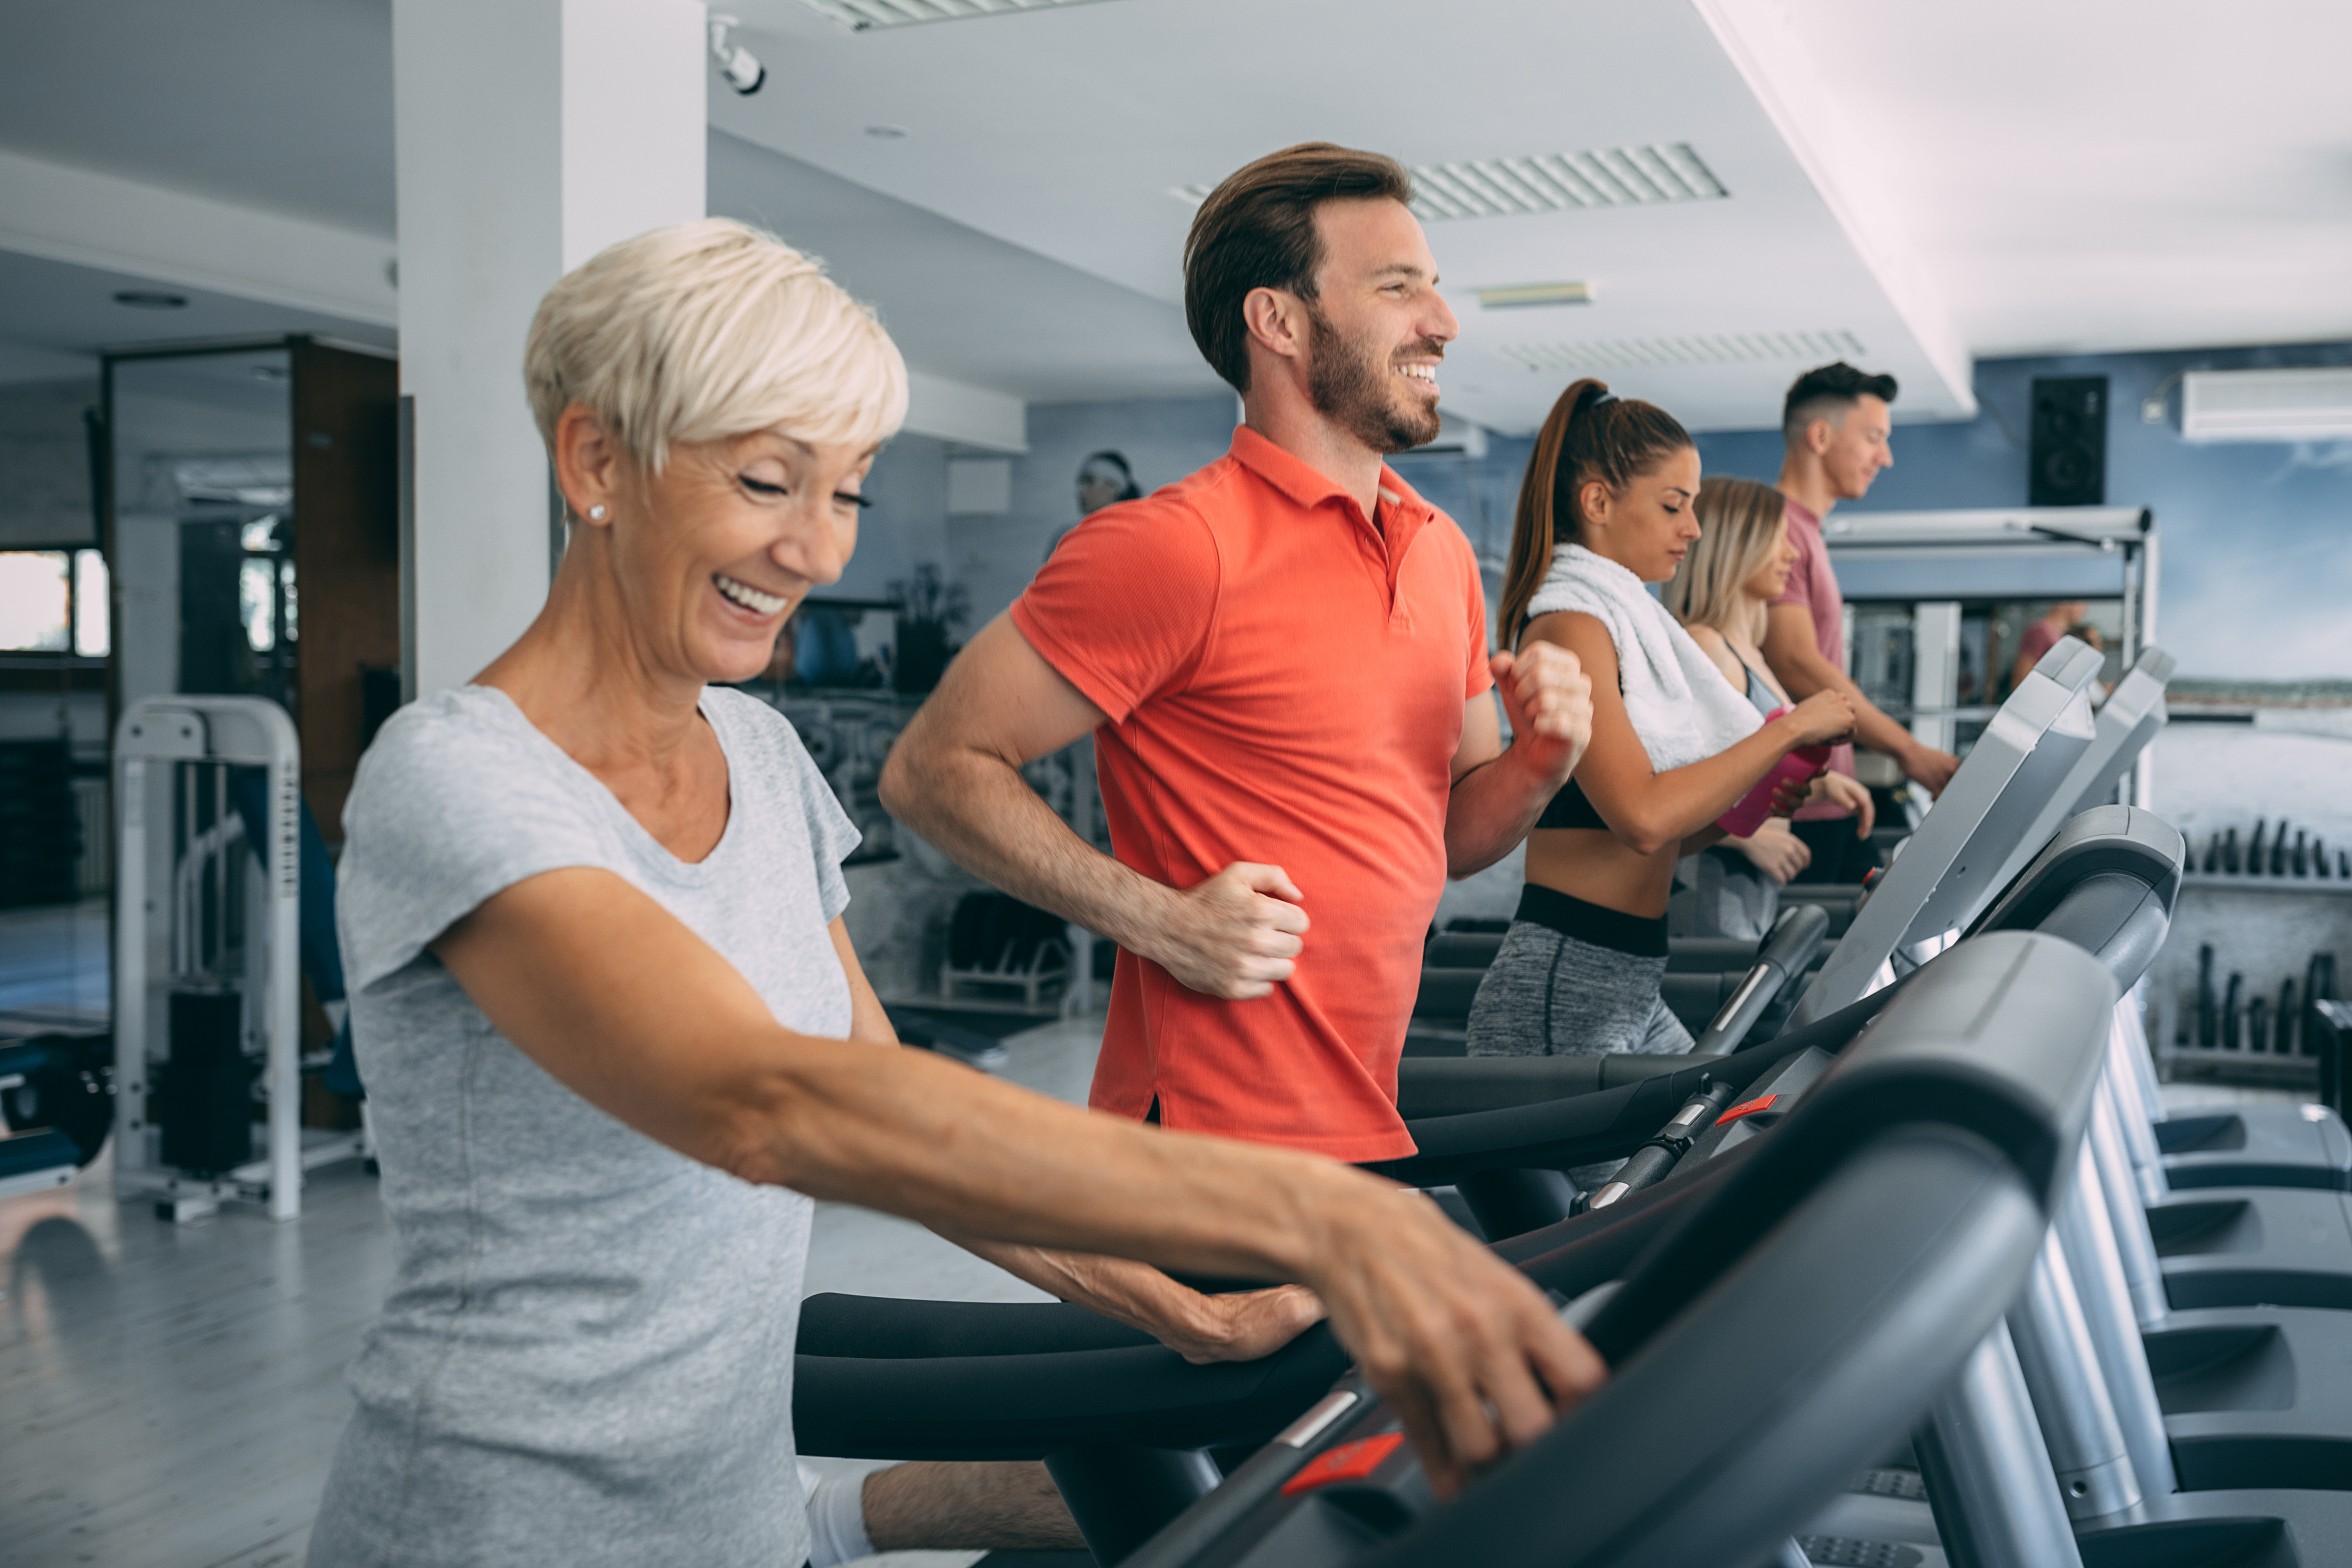 American Family Fitness Prices